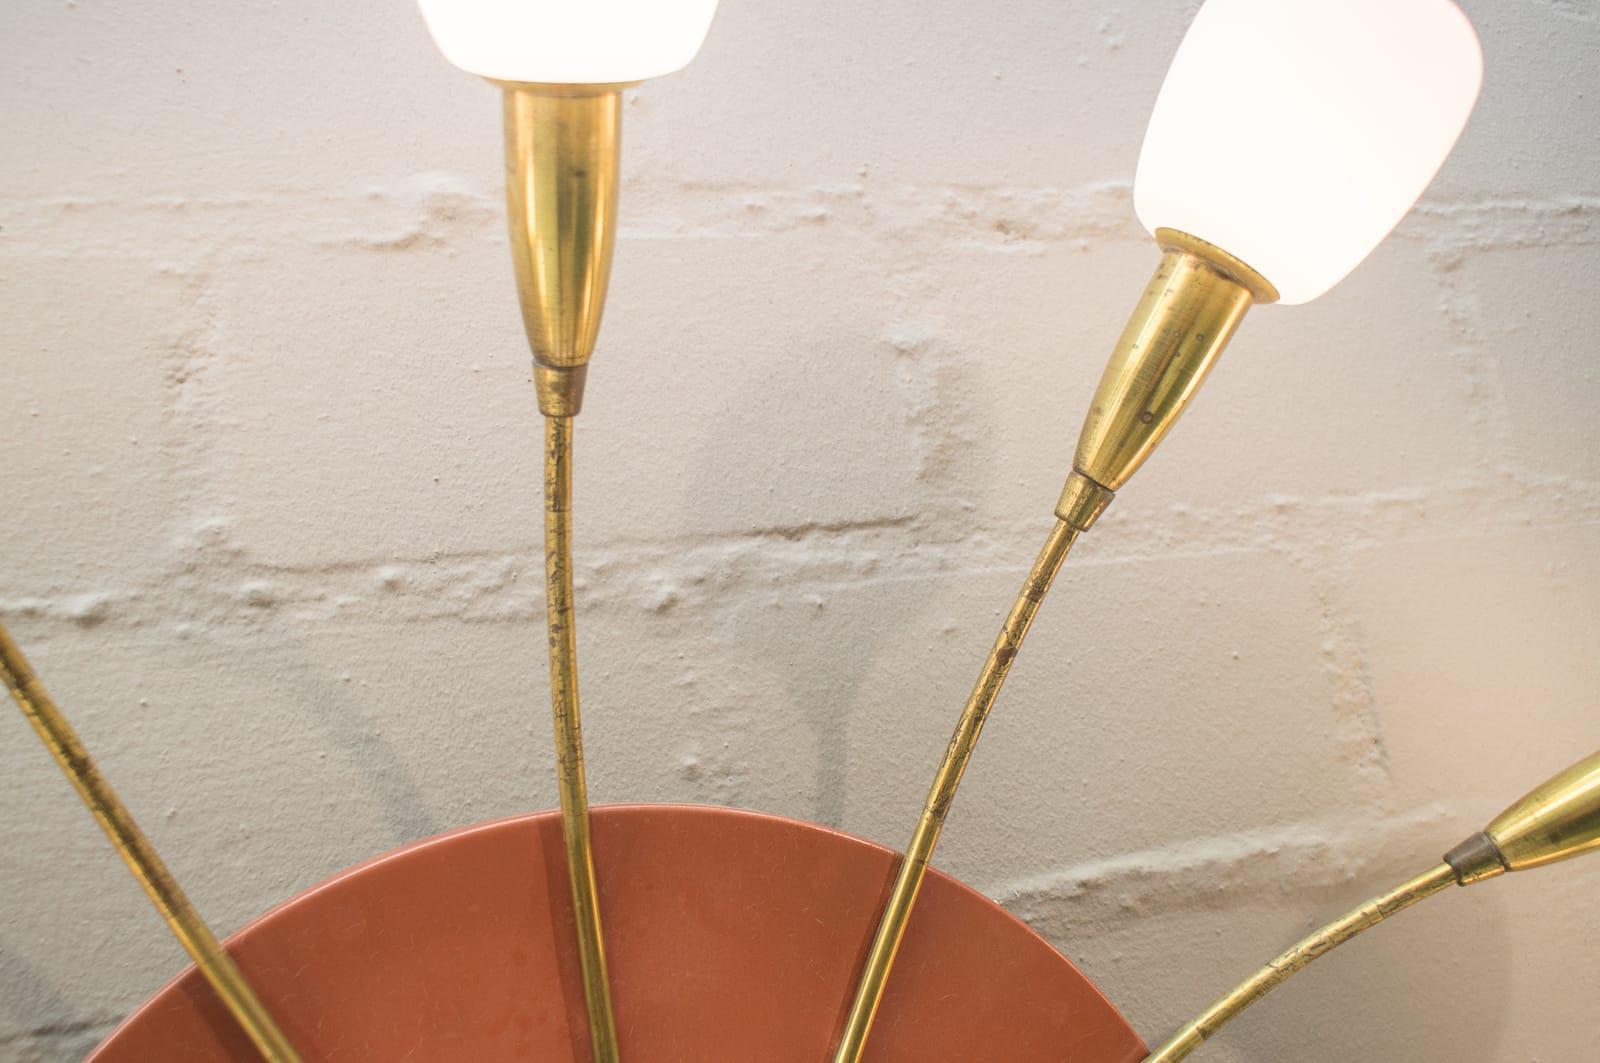 Large Midcentury Wall or Ceiling Sputnik Lamp with 12 Arms, 1950s For Sale 2